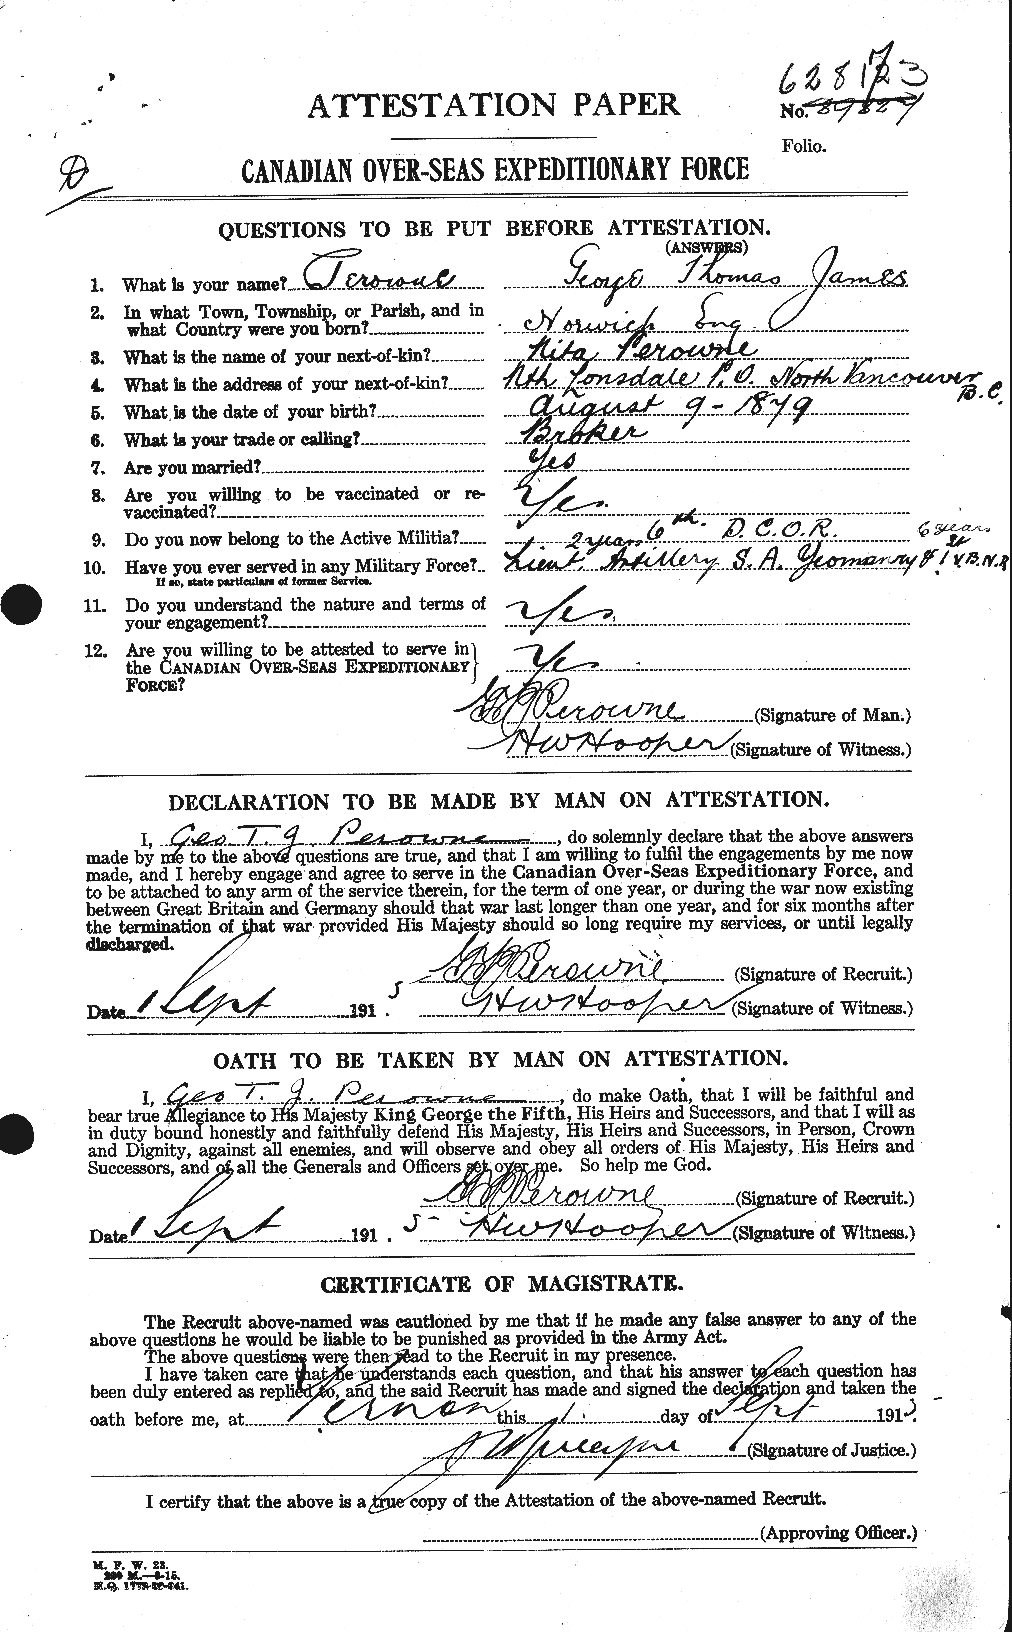 Personnel Records of the First World War - CEF 574194a